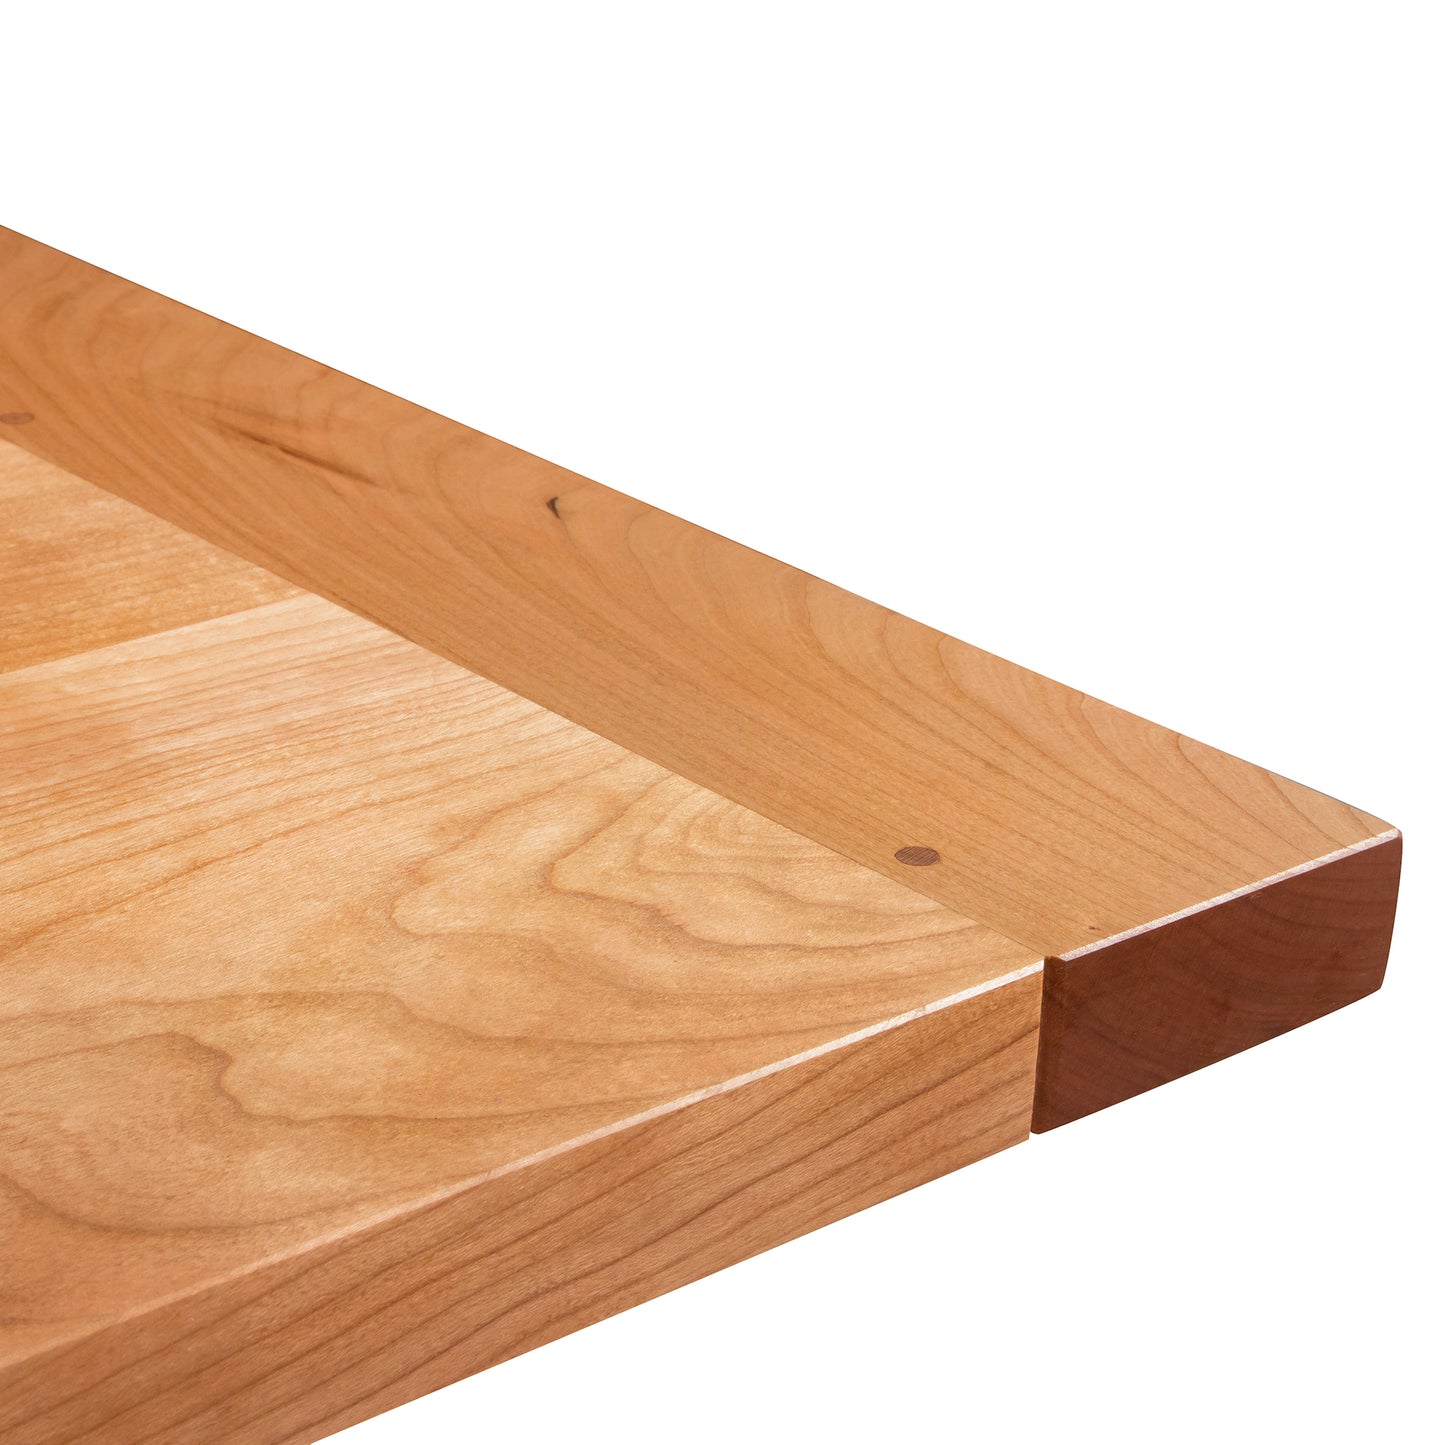 Close-up of a corner of a Maple Corner Woodworks Vermont Shaker Harvest Extension Dining Table showing the wood grain and joinery against a white background.